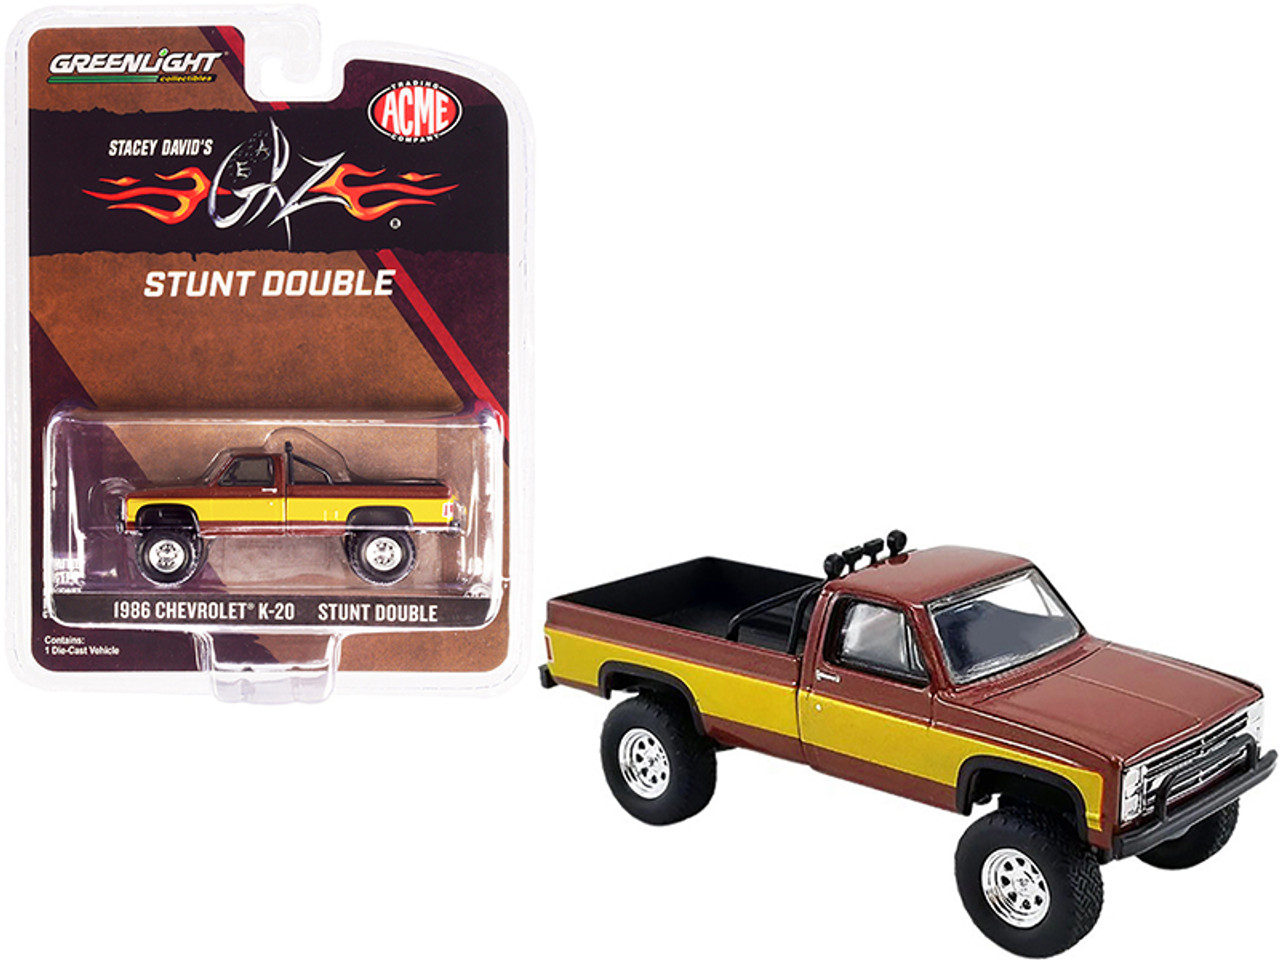 1986 Chevrolet K-20 Pickup Truck "Stunt Double" Brown Metallic with Gold Side Stripes (Stacey David's GearZ) Fall Guy Tribute 1/64 Diecast Model Car by Greenlight for ACME